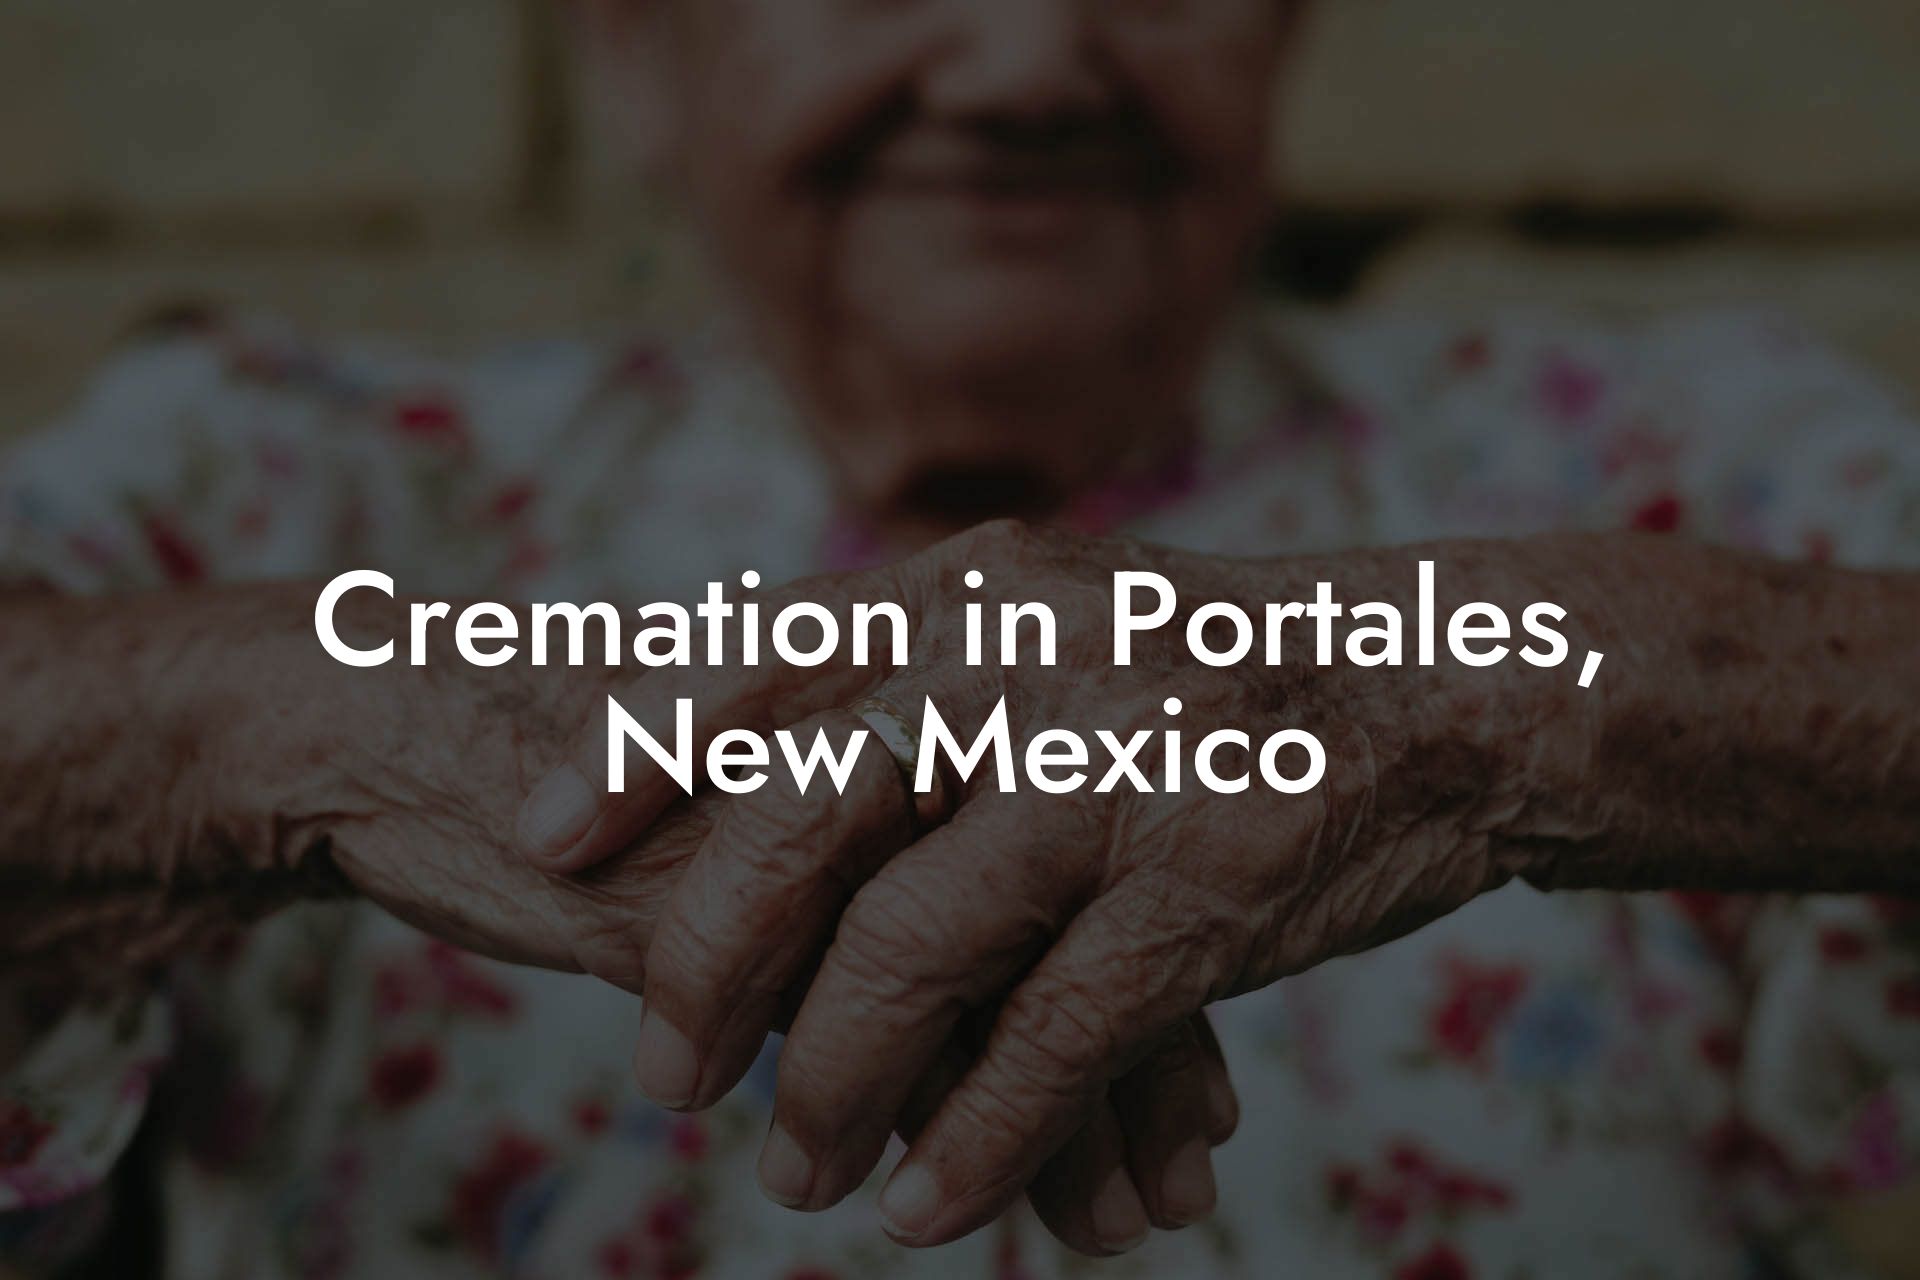 Cremation in Portales, New Mexico